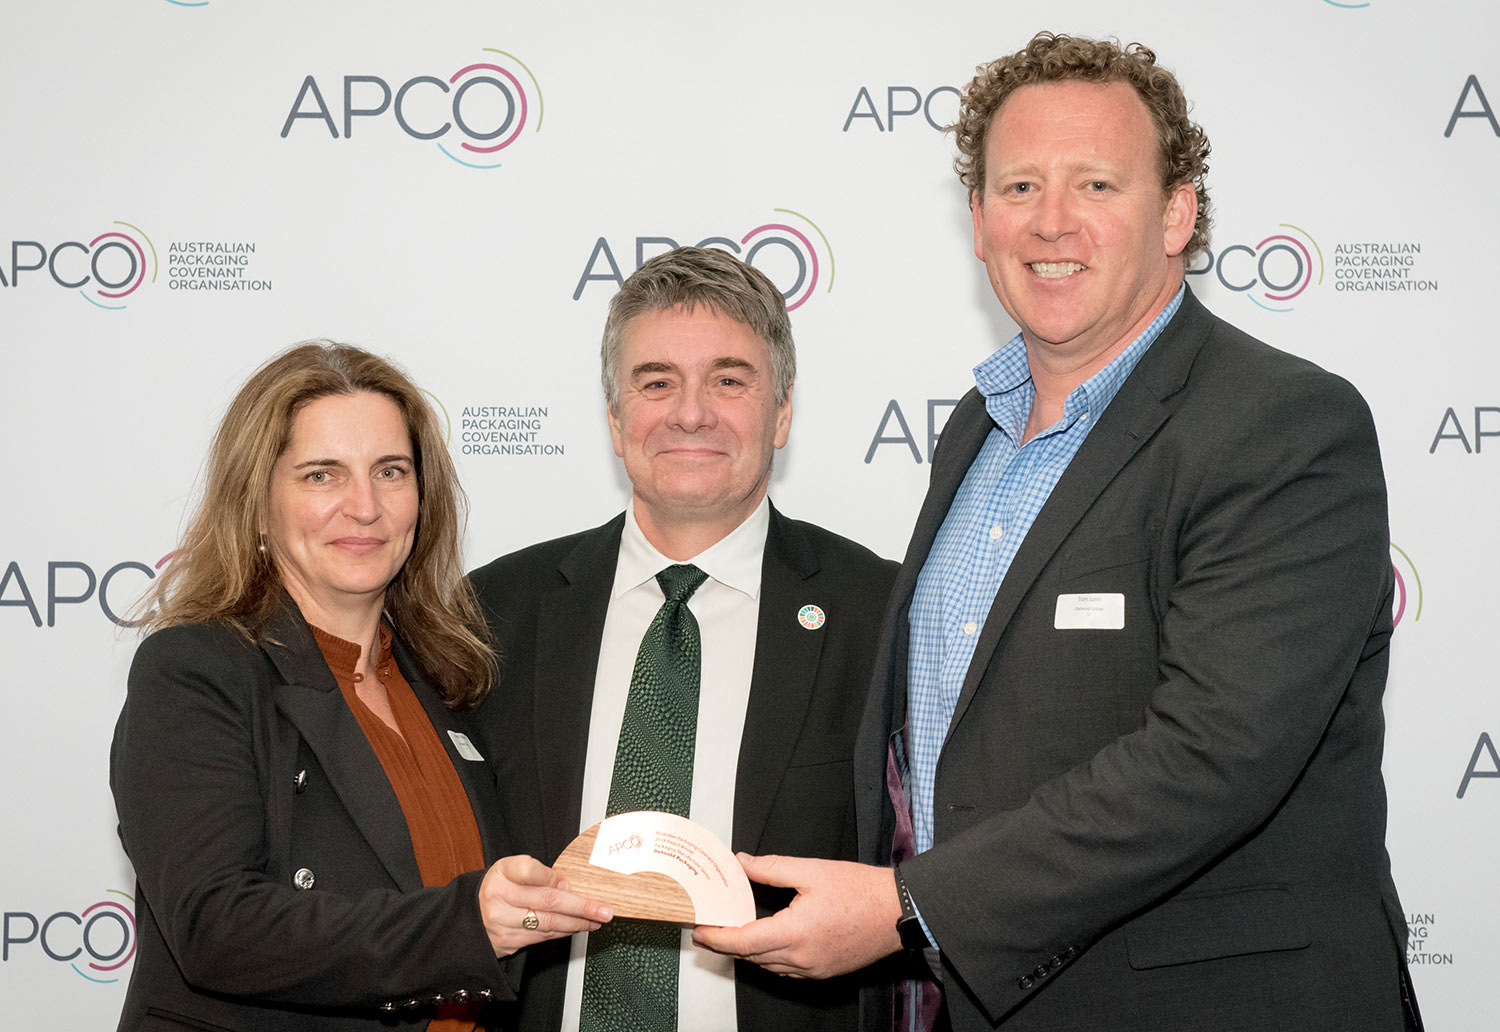 Detmold Group's Anna Faulkiner and Tom Lunn accept the Packaging Manufacturer Sector Award for 2019 from APCO